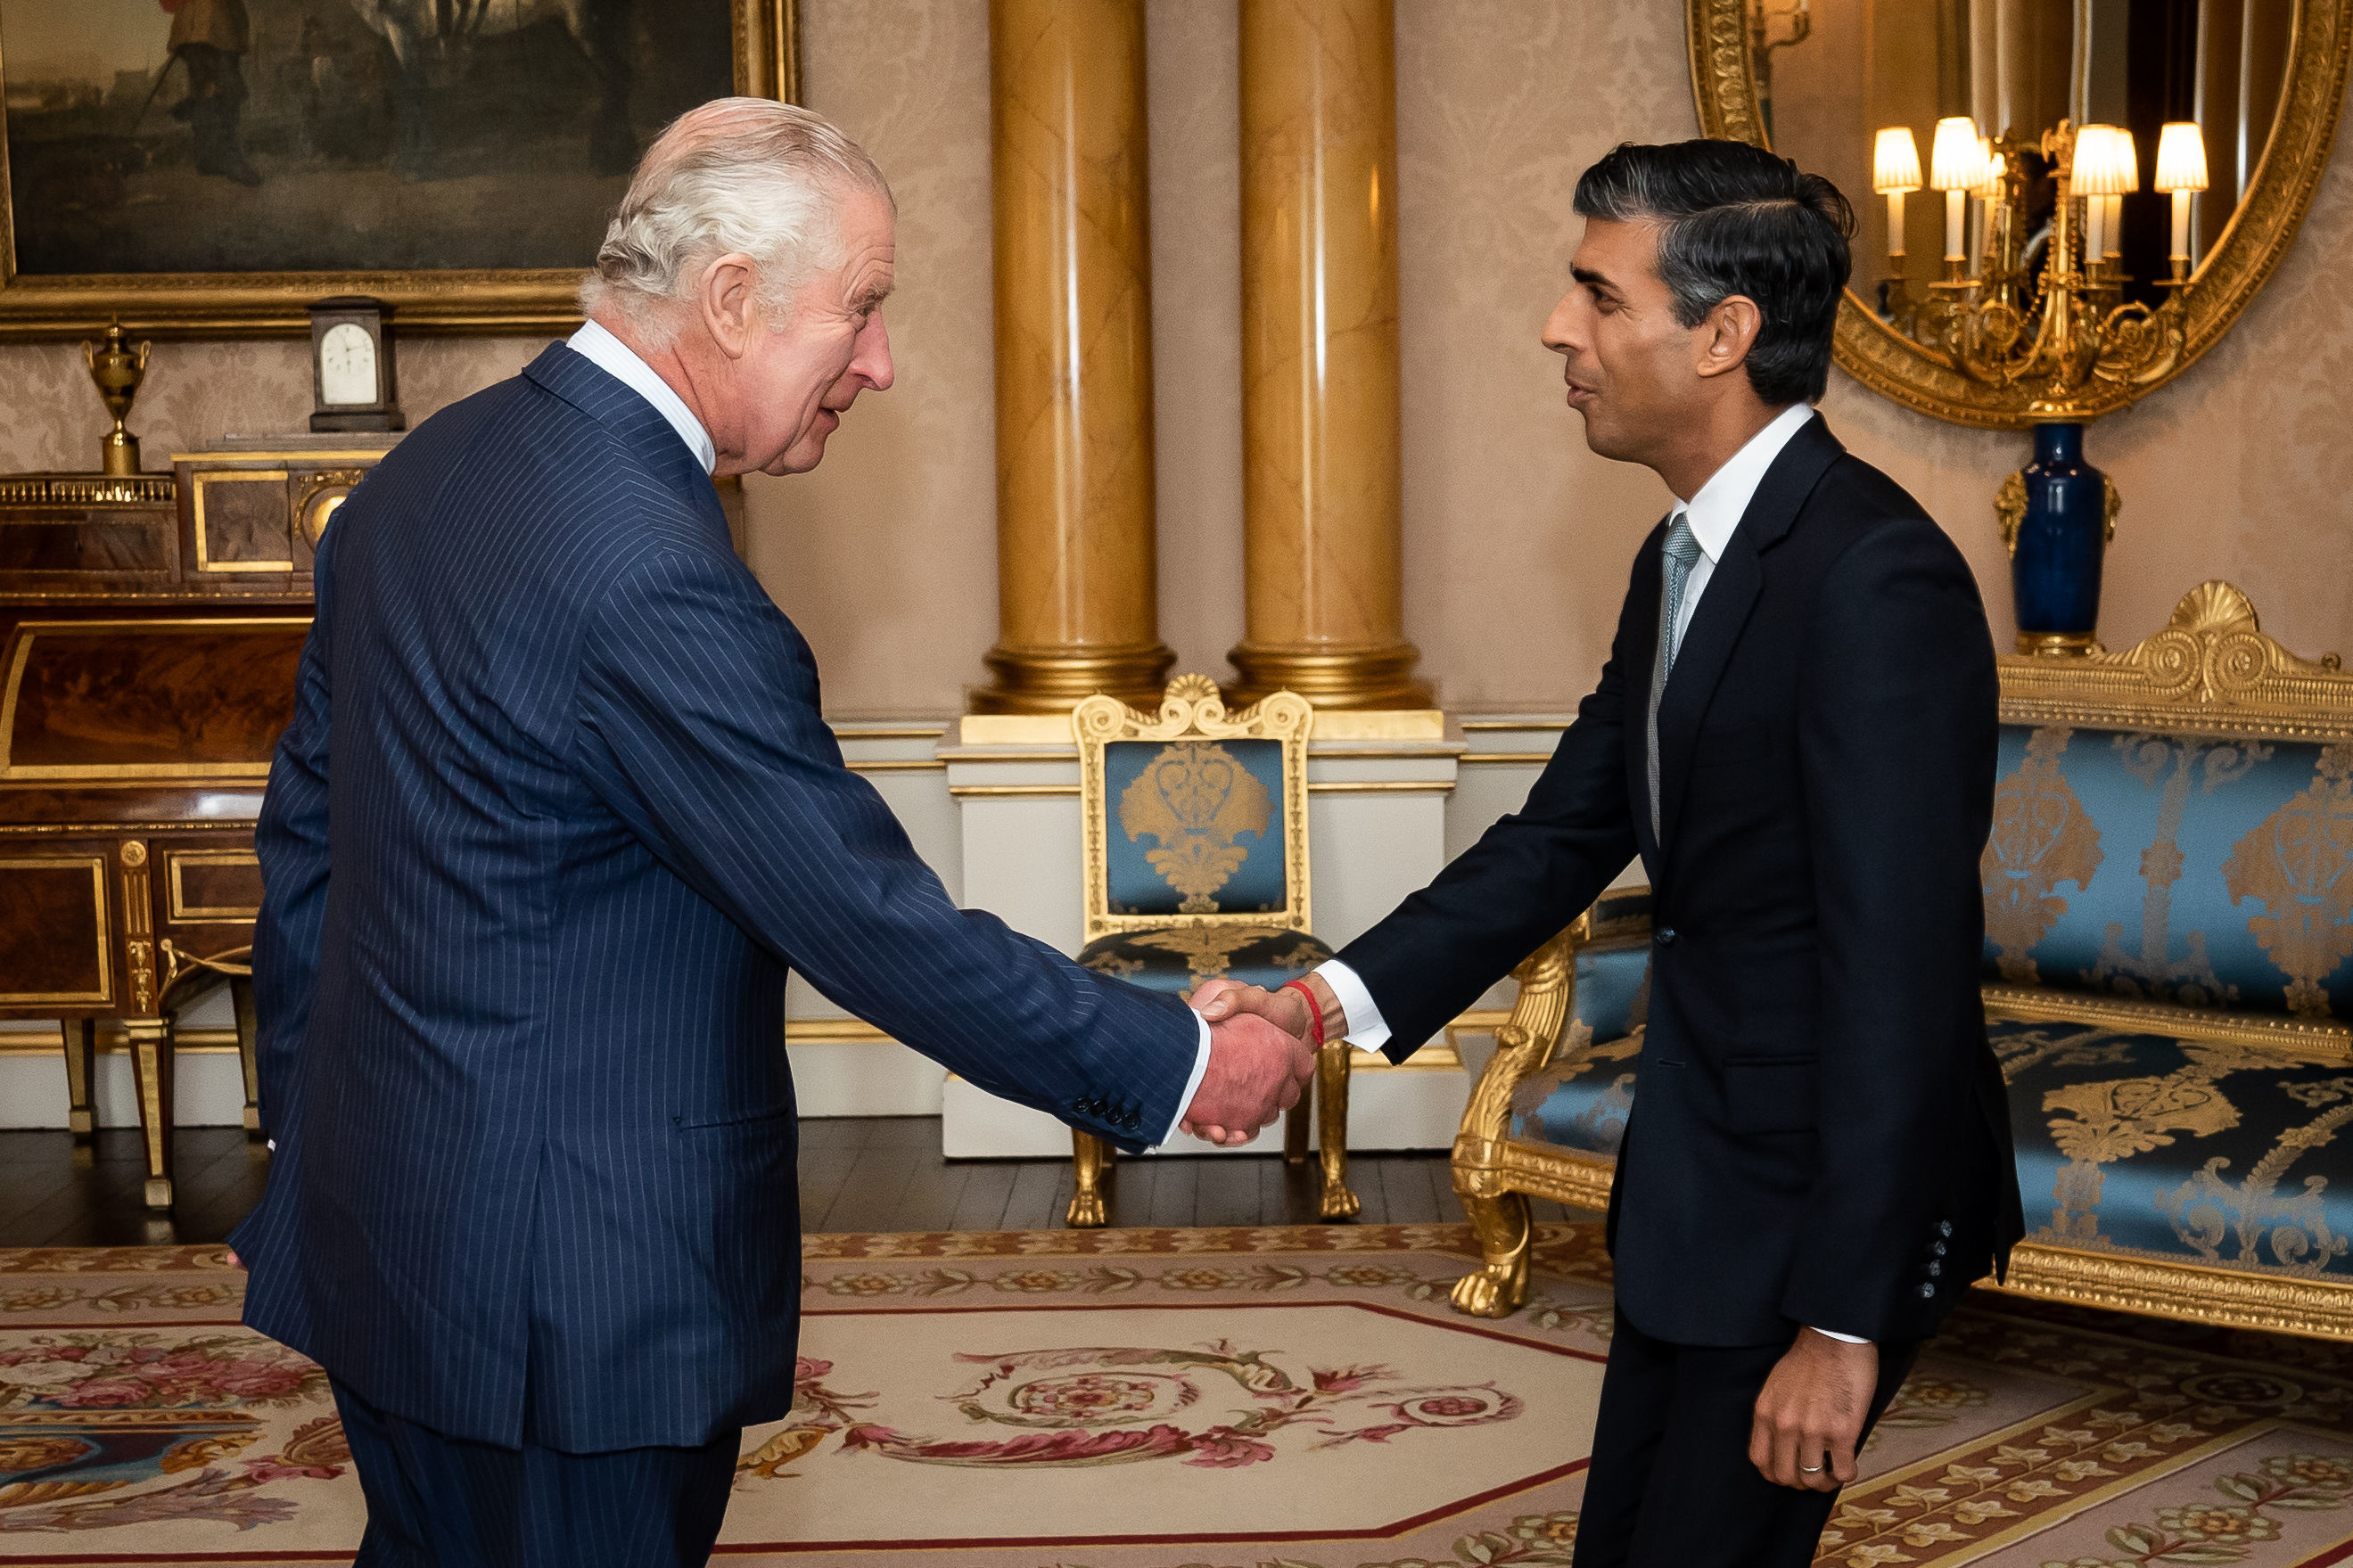 October, 2022: King Charles shakes Rishi's hand during an audience at Buckingham Palace where he invited the new Tory leader to become Prime Minister